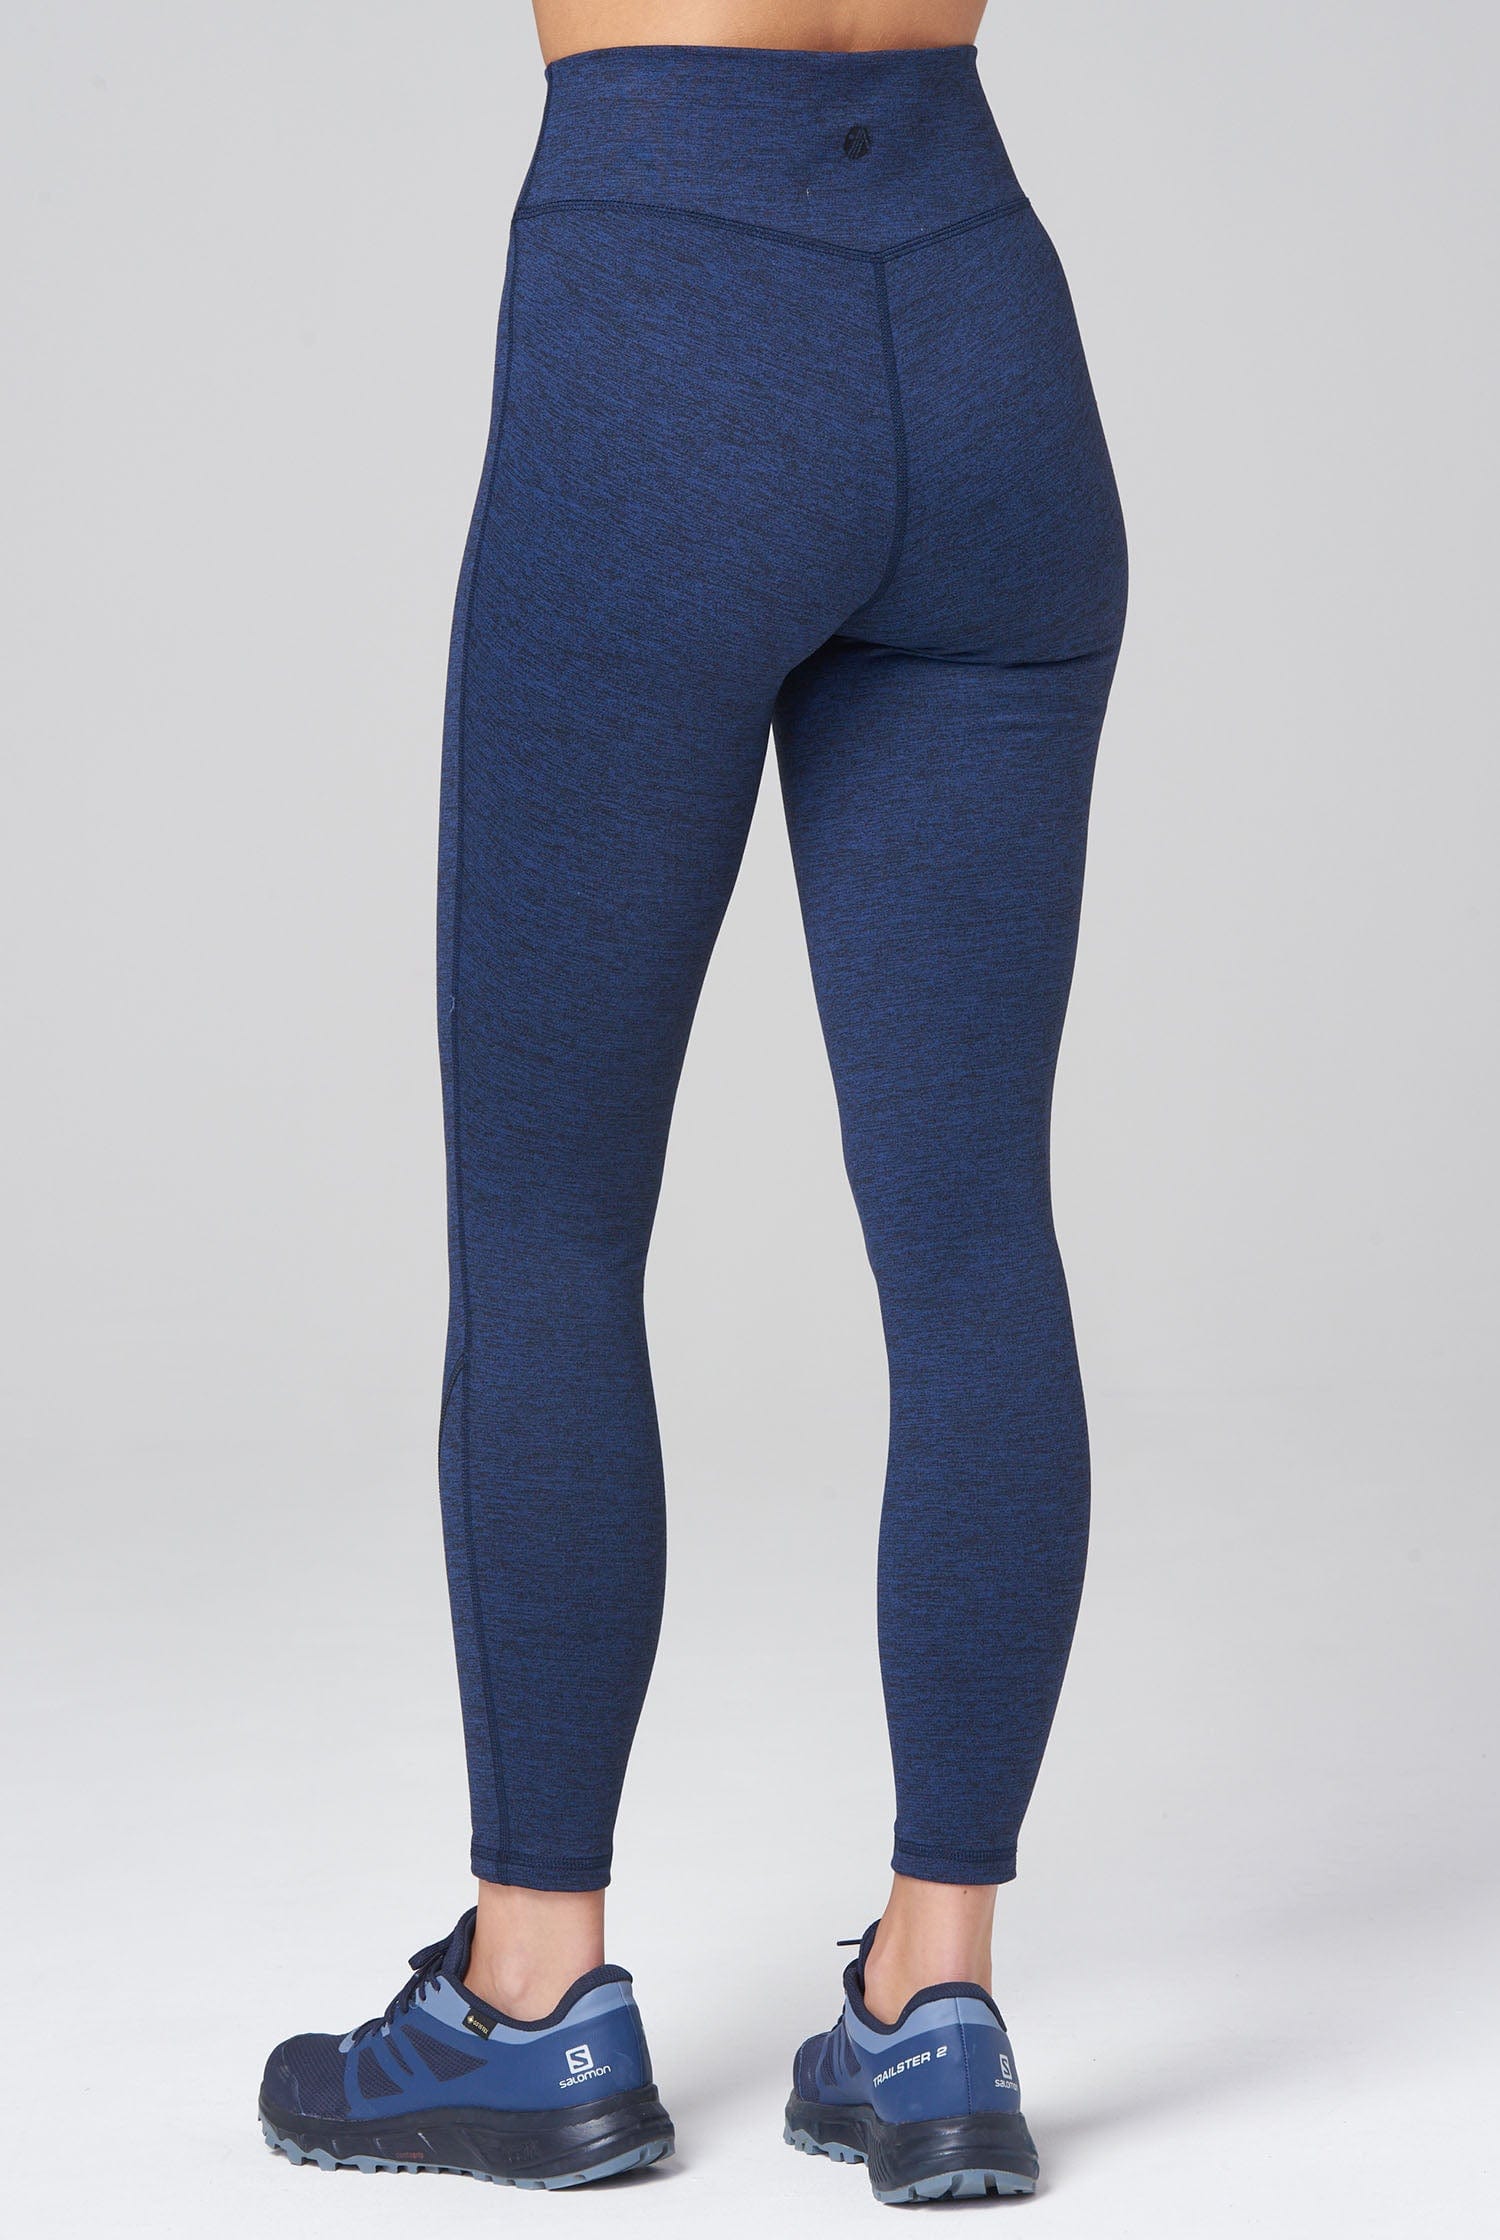 Reversible Double Sided Thermal Termo Leggings For Men And Women Warm  Seamless Bottoms In Two Colors With Wide Waist From Alymall, $22.83